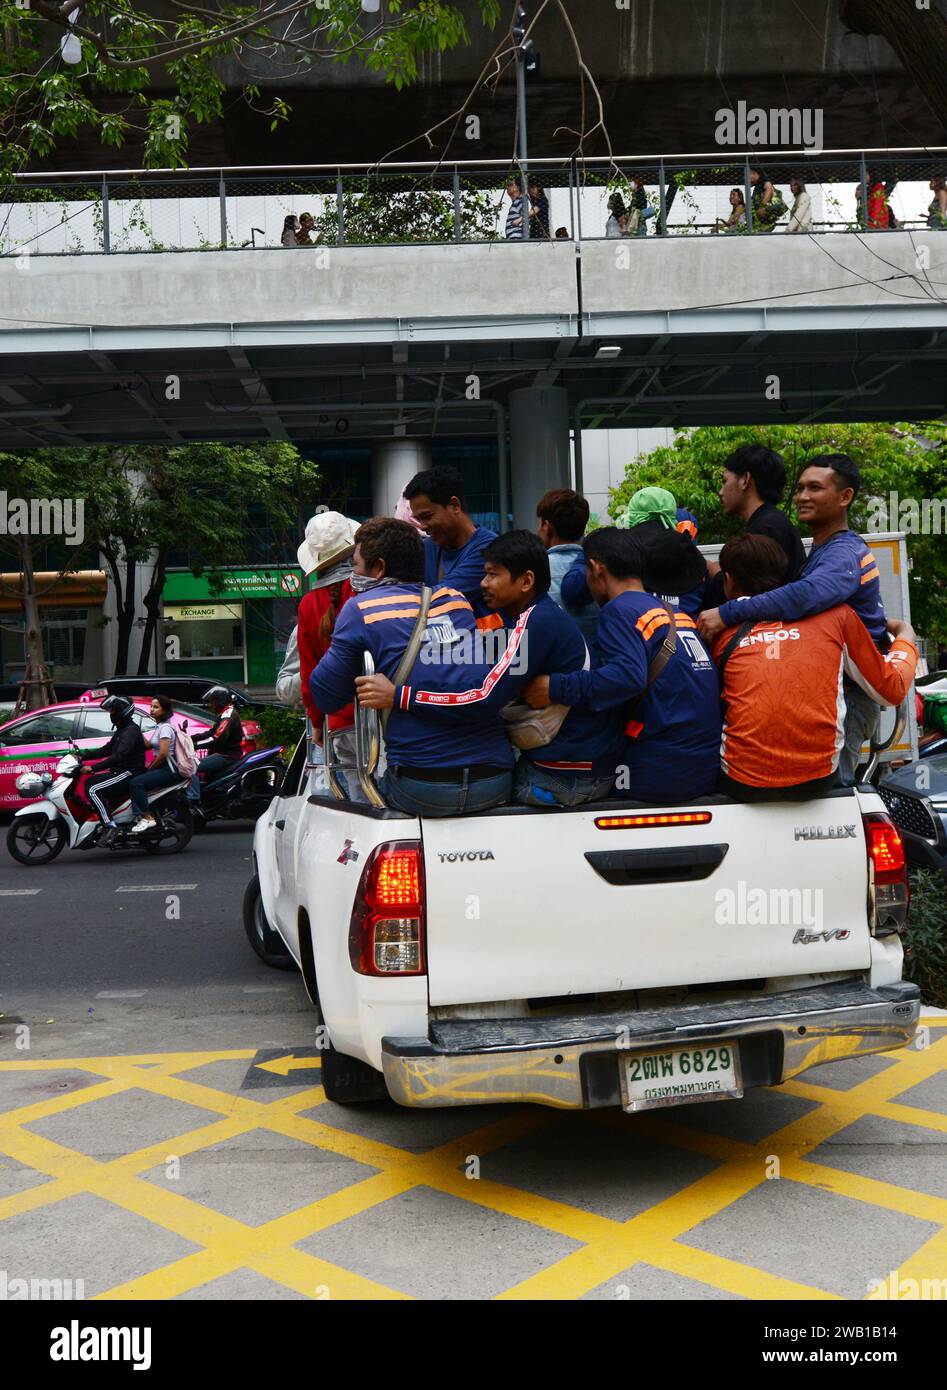 A Pickup truck fully loaded with people riding in the rear in Bangkok, Thailand. Stock Photo